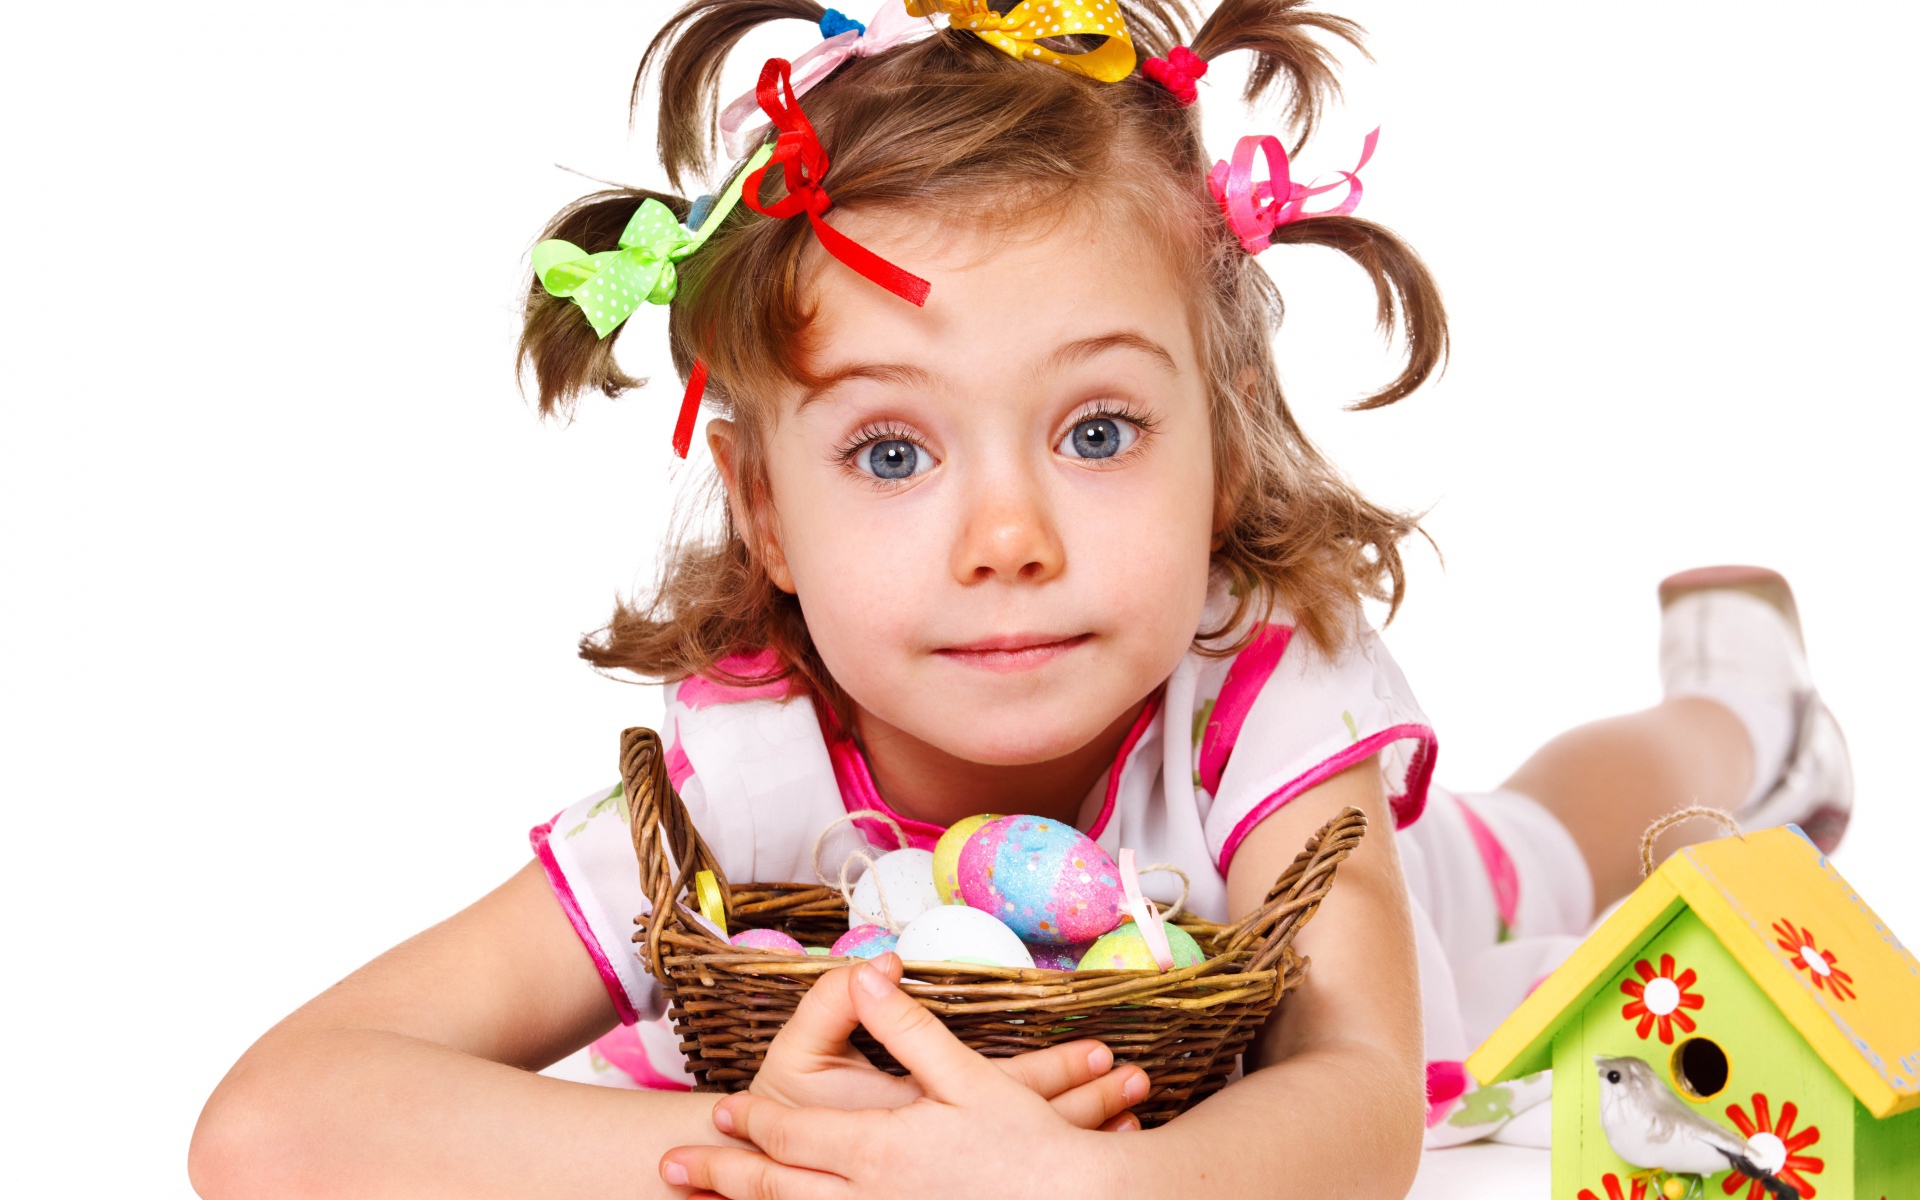 Little girl with a basket of Easter eggs on a white background